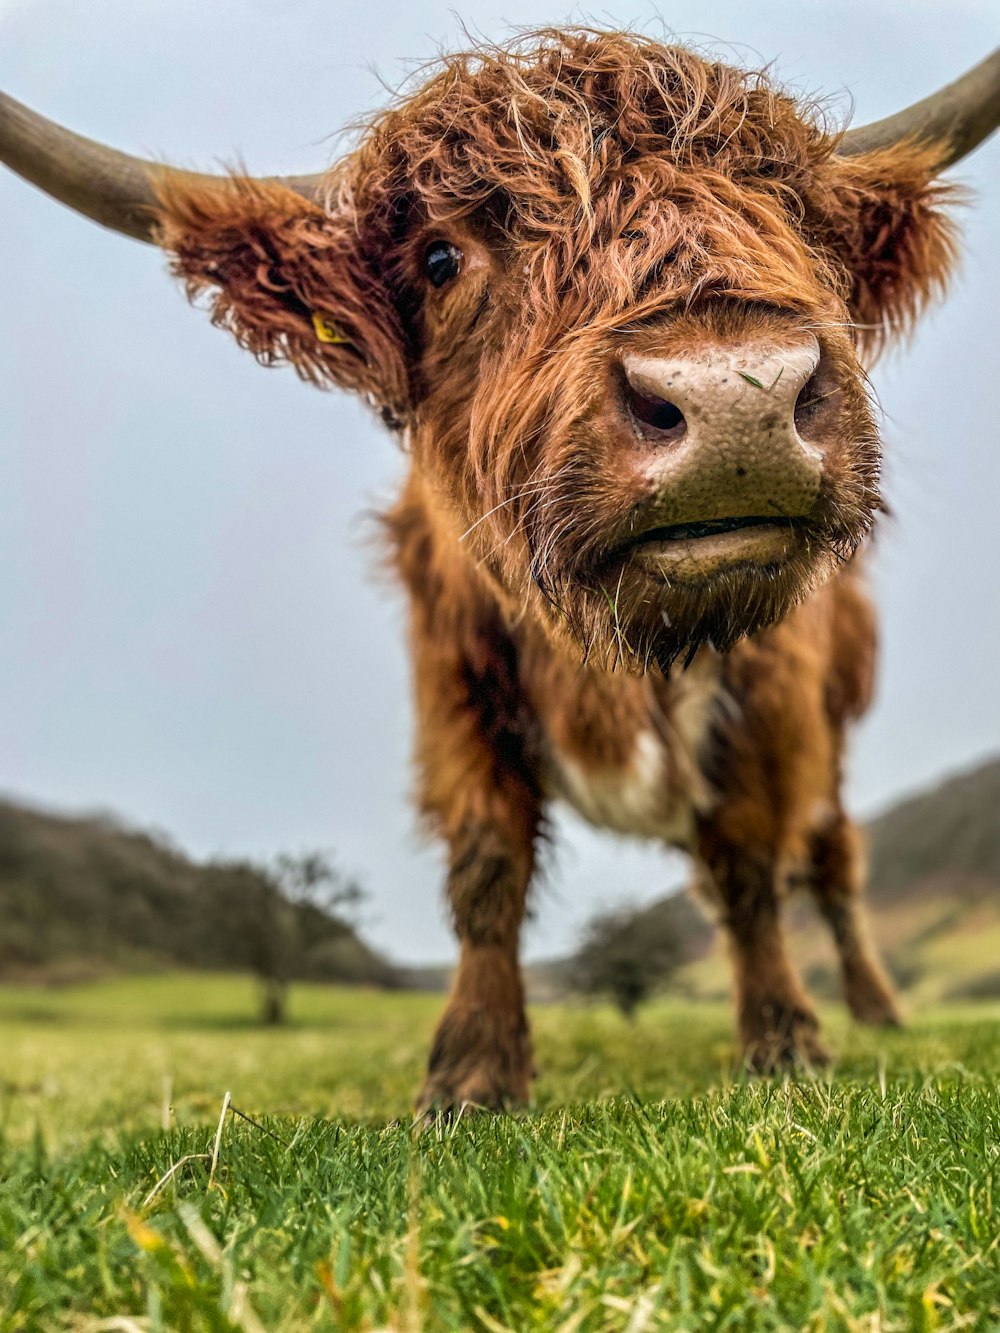 a close up of a cow with very long horns